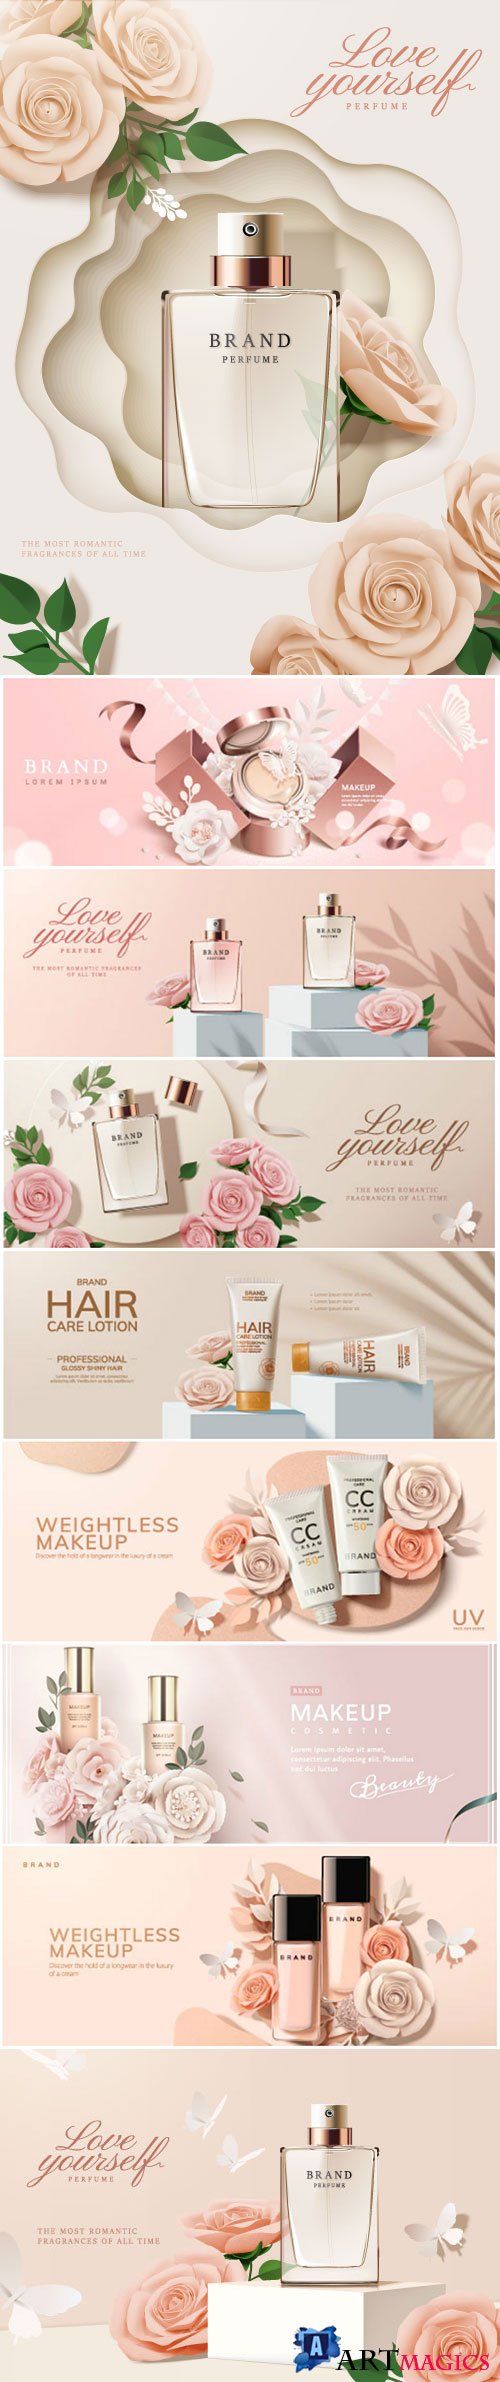 Brand cosmetic design, foundation banner ads # 2